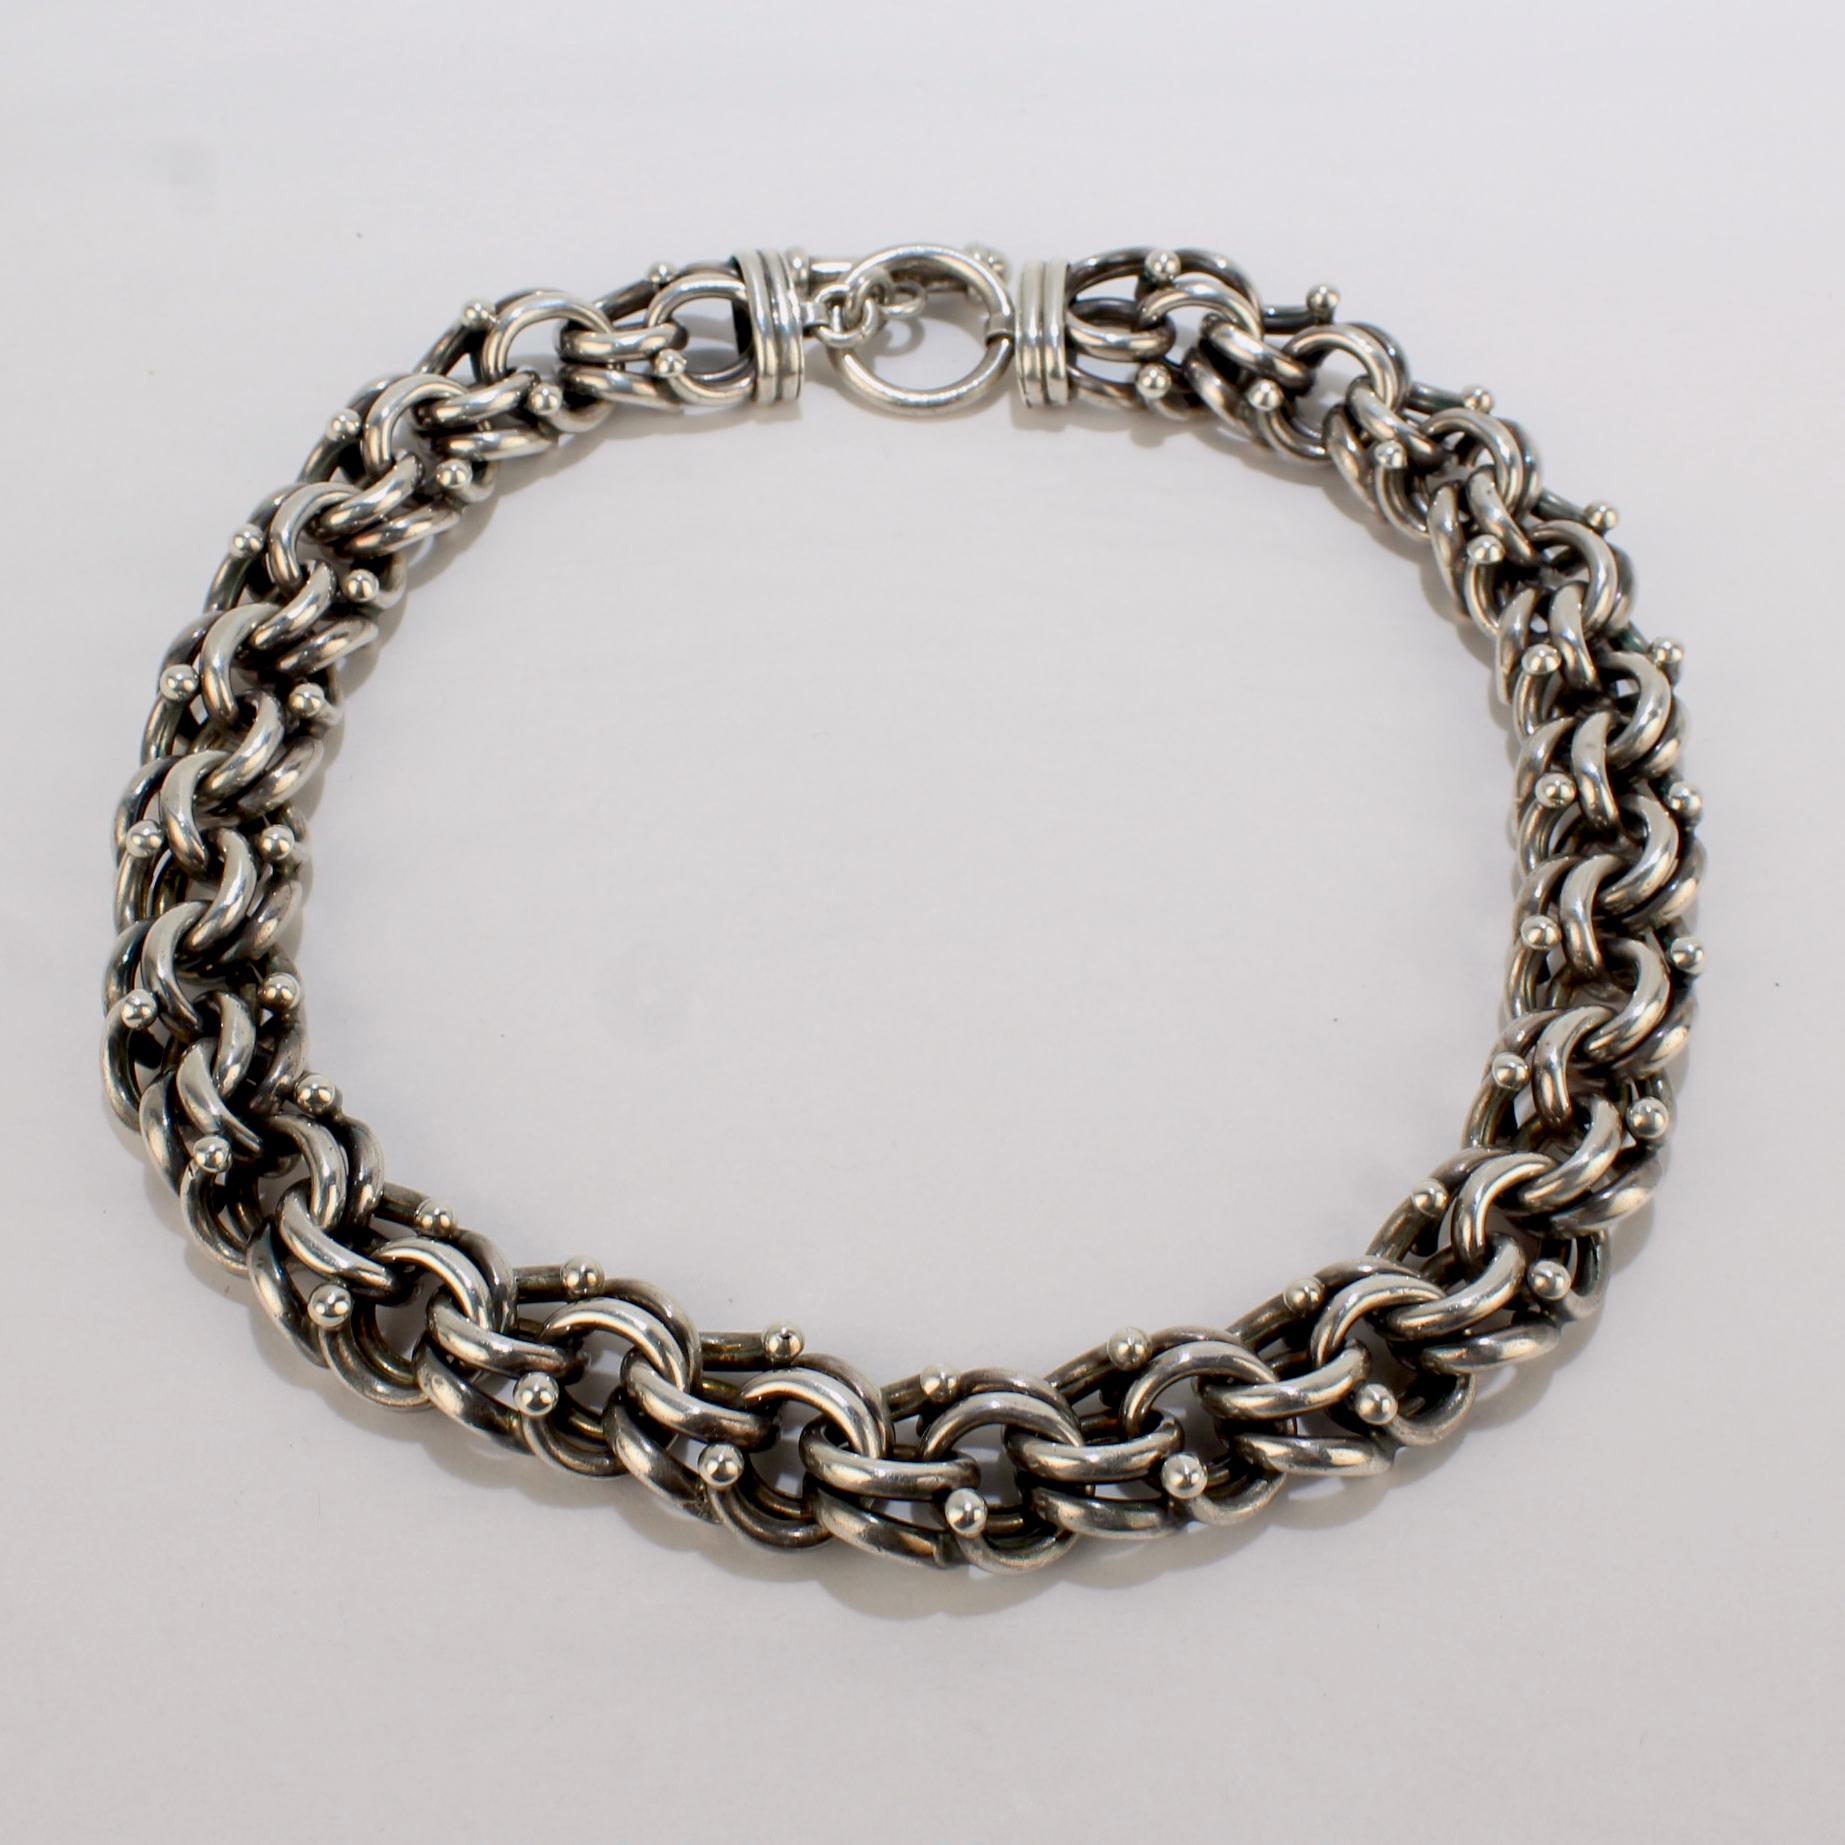 A very fine heavy gauge Mexican sterling silver dog chain style choker.

With large, twisted sterling silver links and a large toggle clasp!

A great, stylish necklace!

Date:
20th Century

Overall Condition:
It is in overall good, as-pictured, used